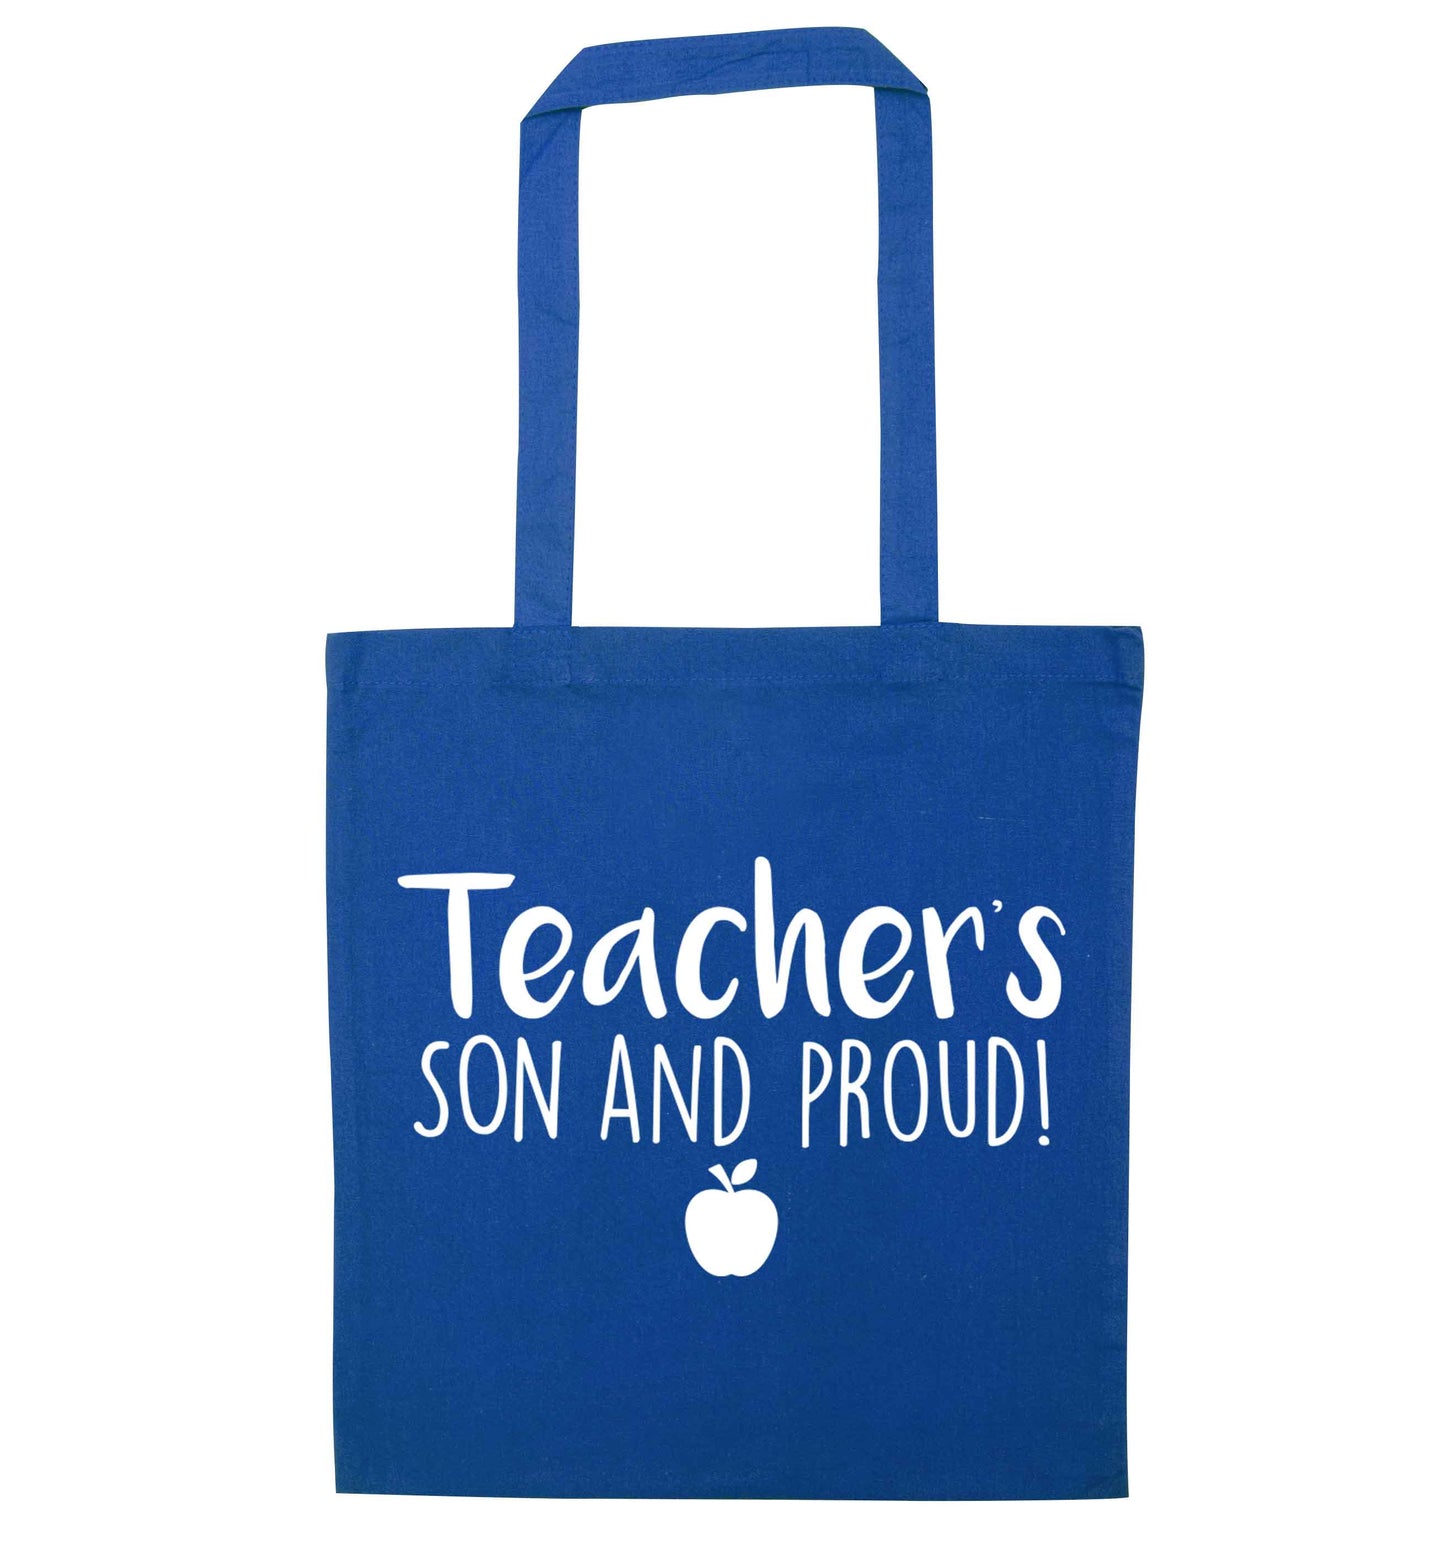 Teachers son and proud blue tote bag